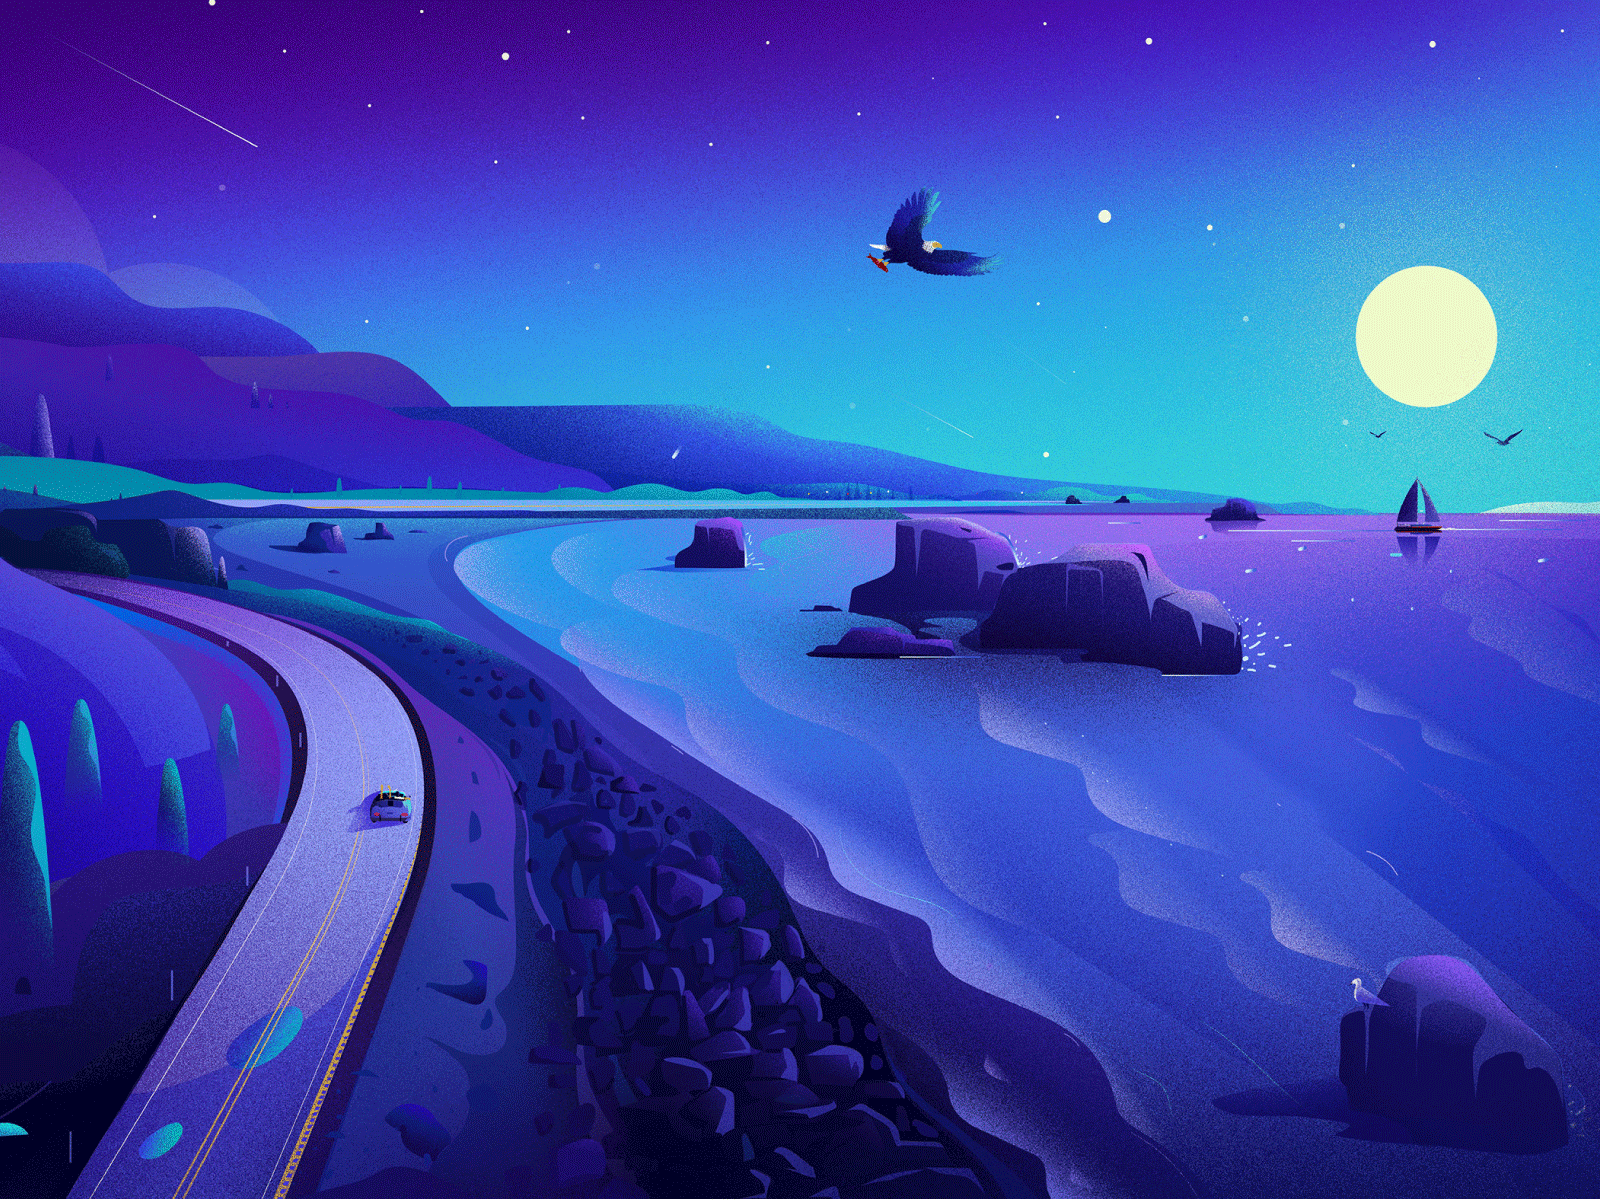 Pacific Coast Highway in - Oregon eagle highway illustration illustrations journey landscape landscape illustration moon nature nature illustration pacific ride travel trip vector